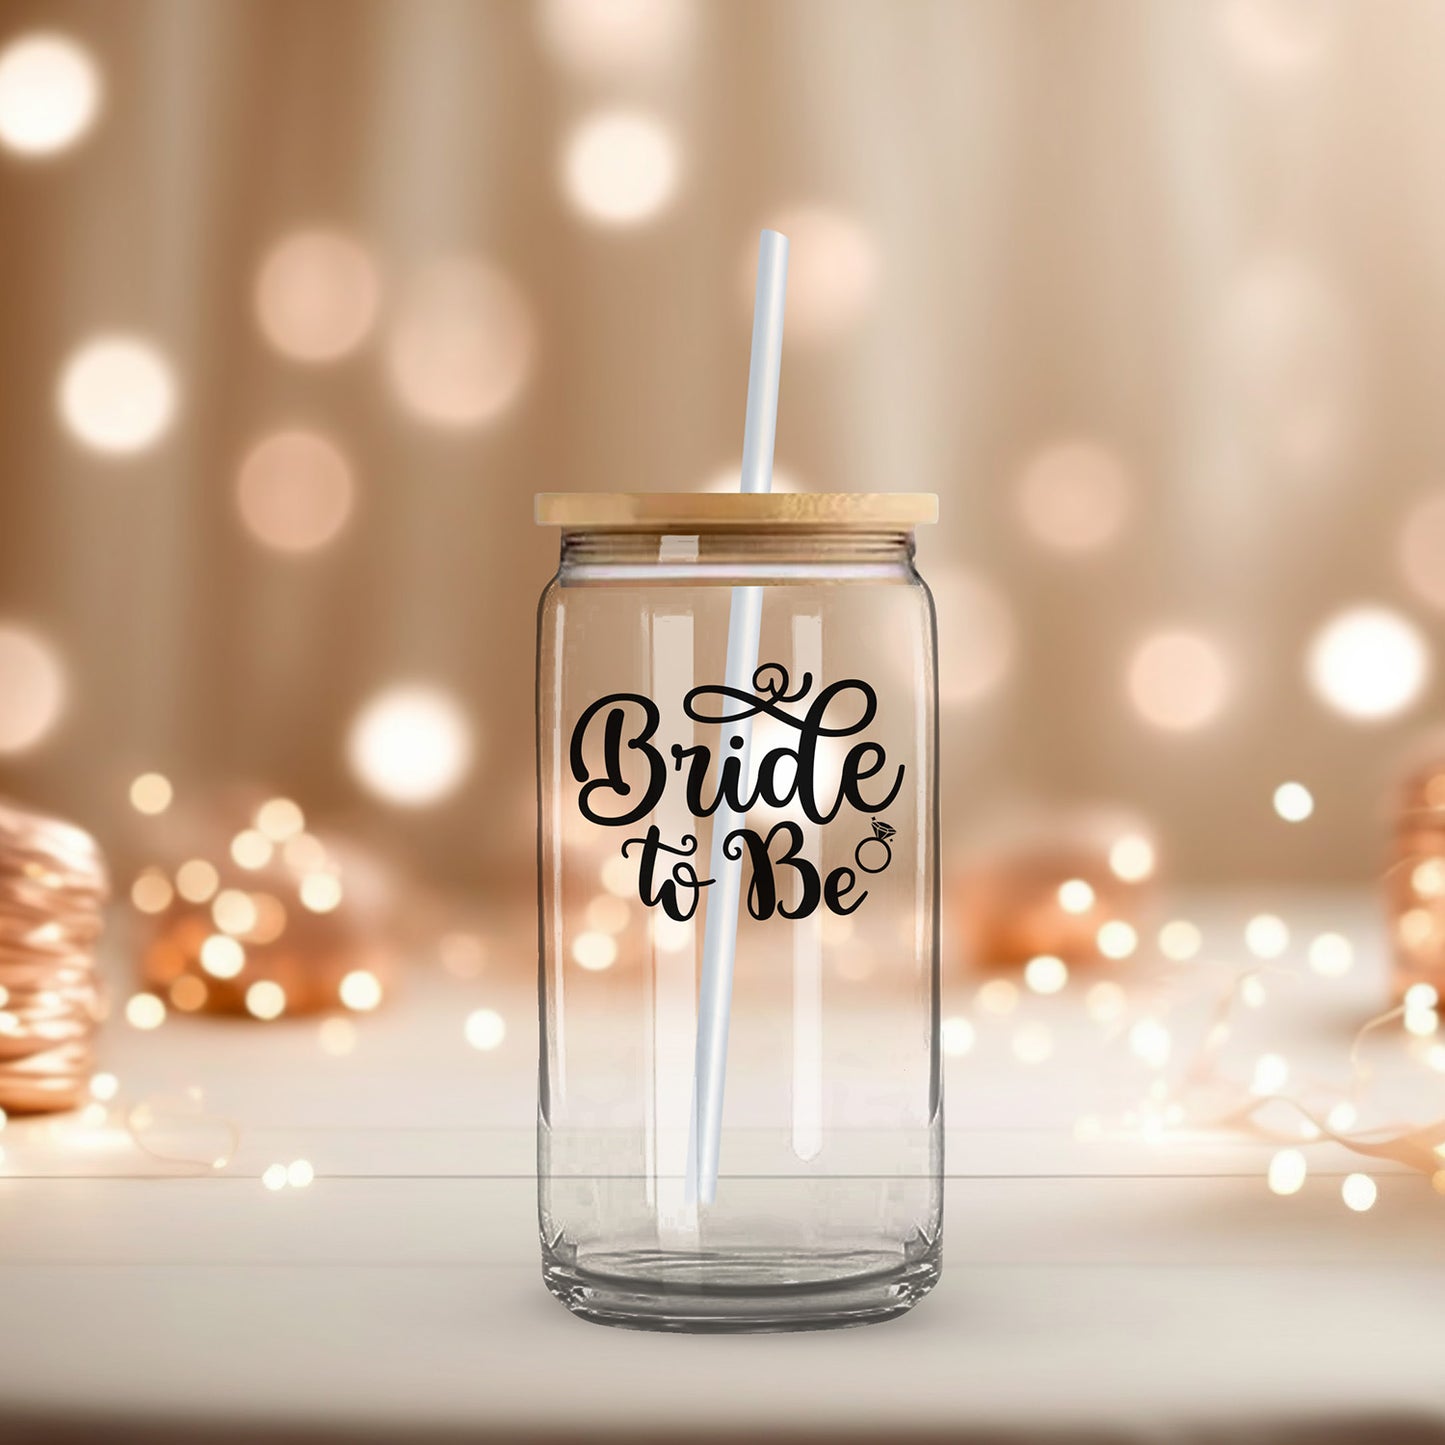 "Bride To Be" Graphic